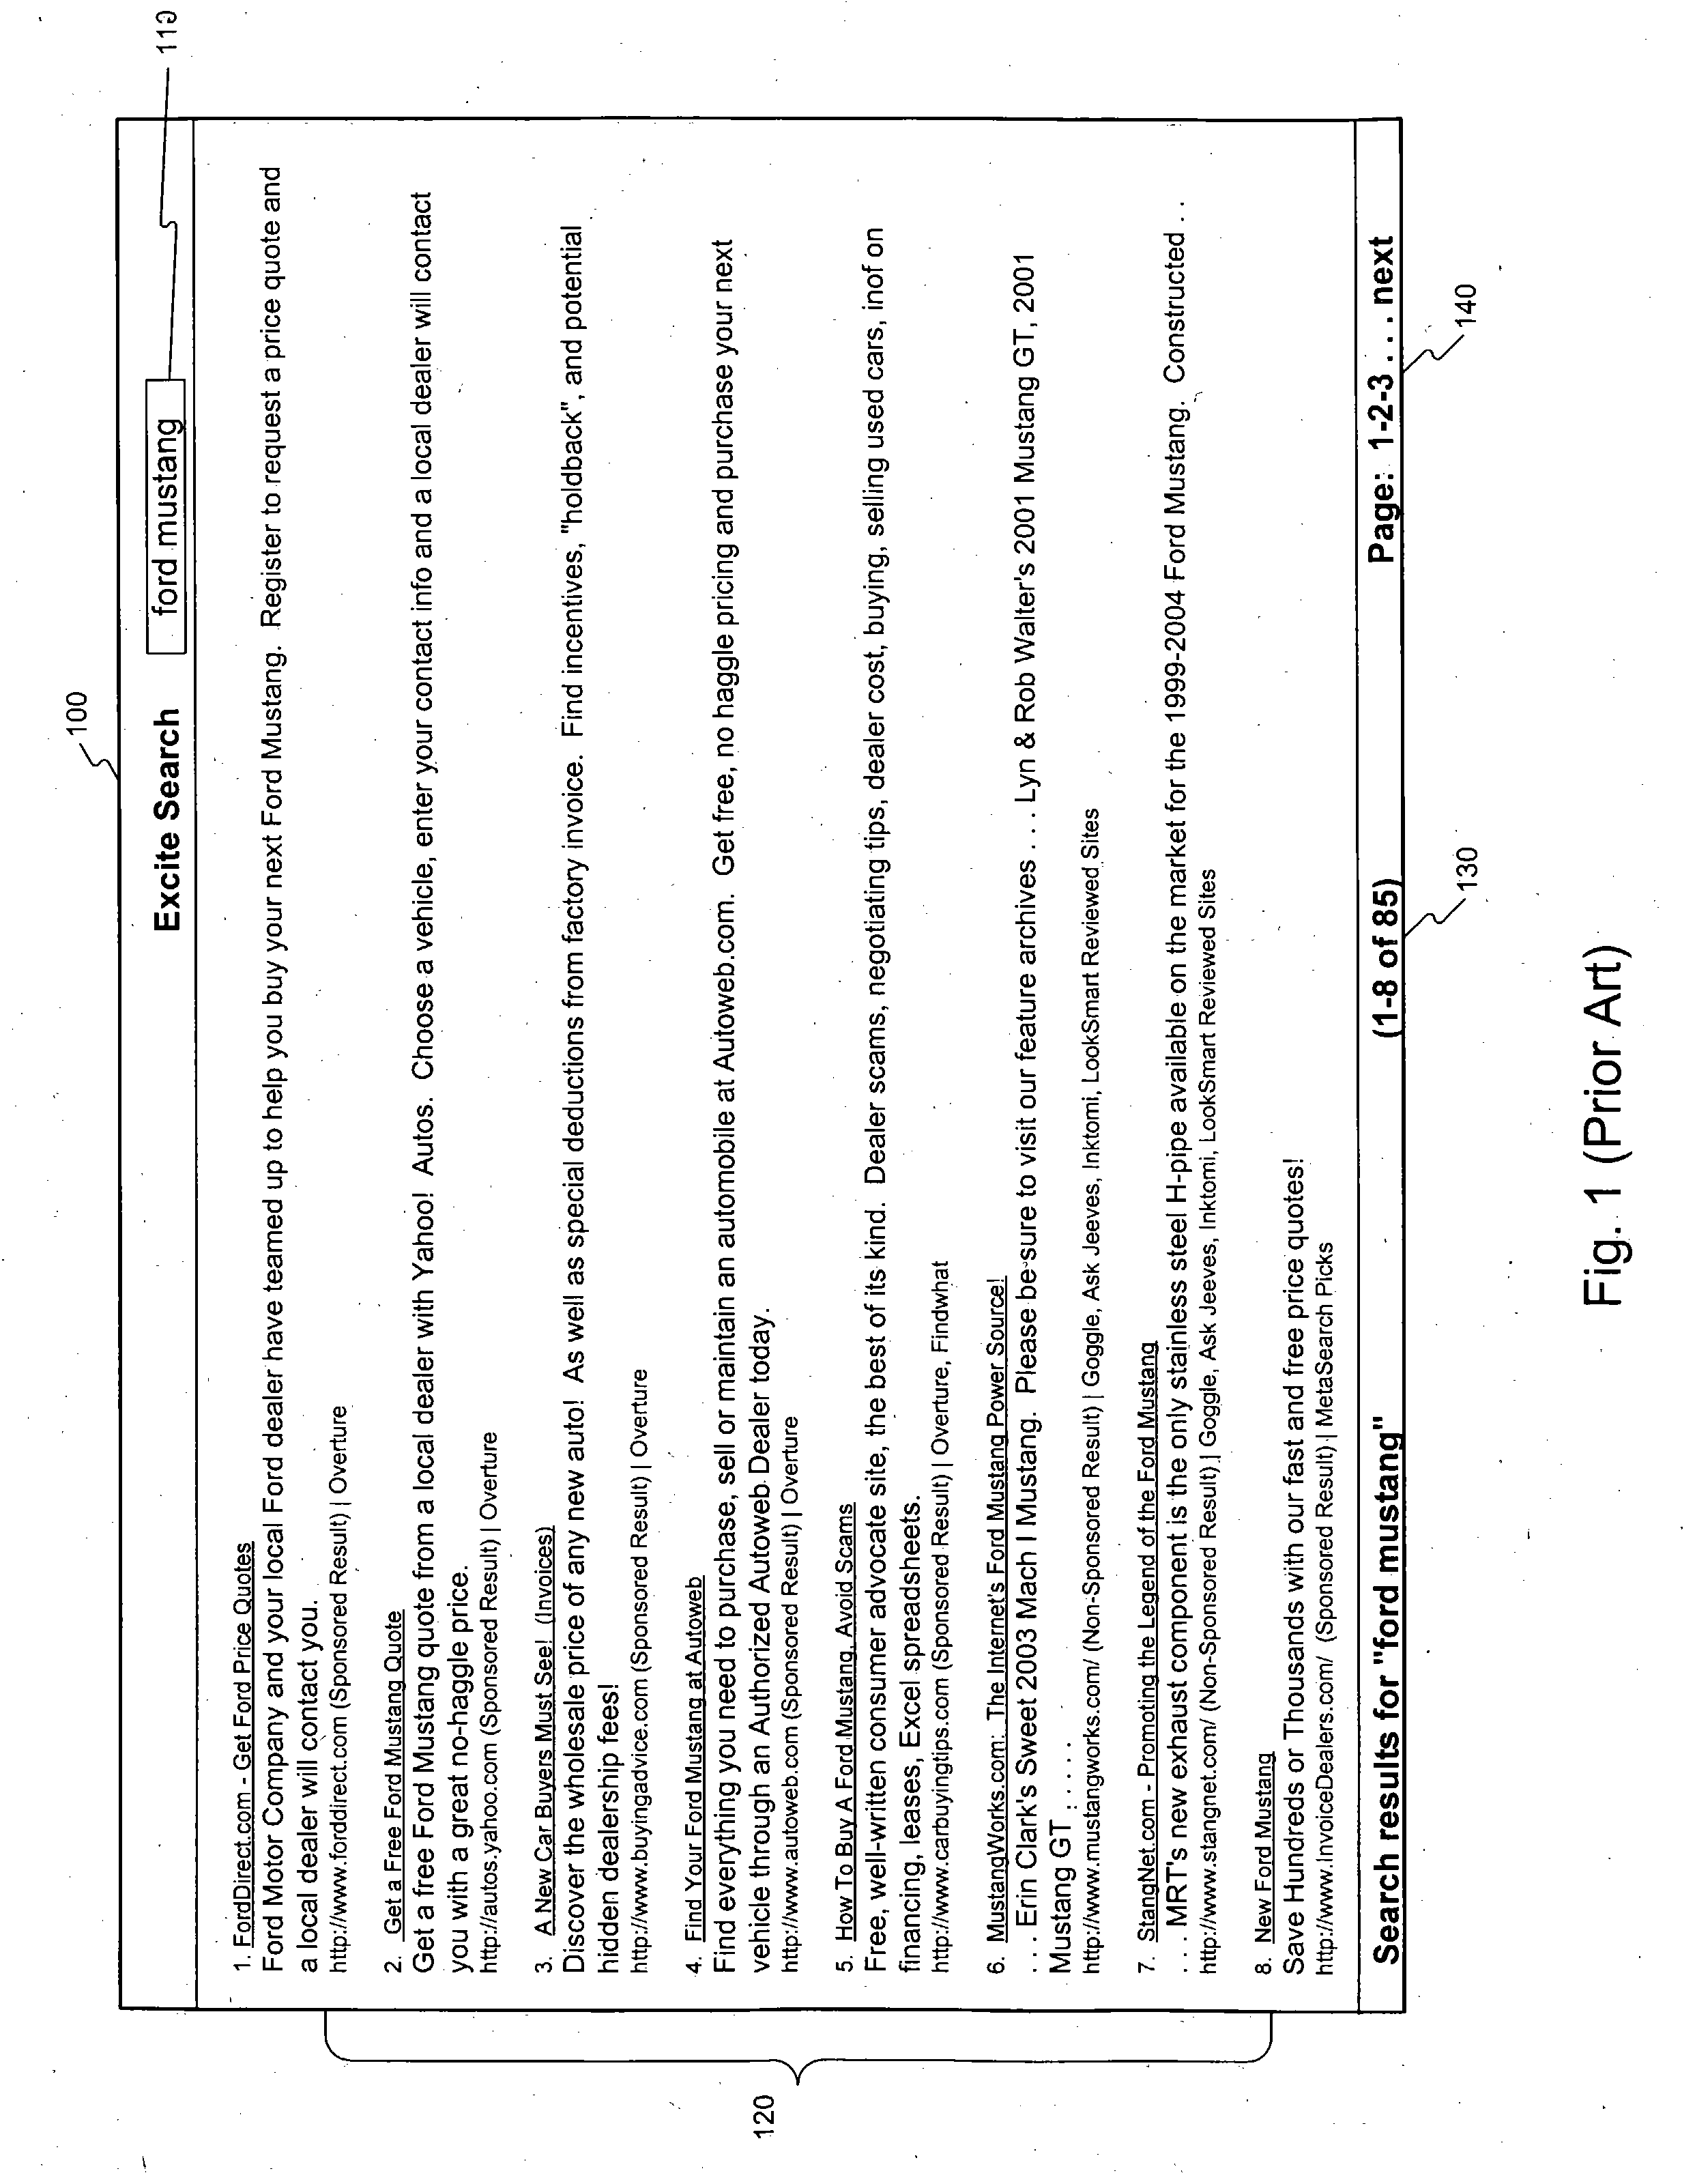 User-friendly search results display system, method, and computer program product